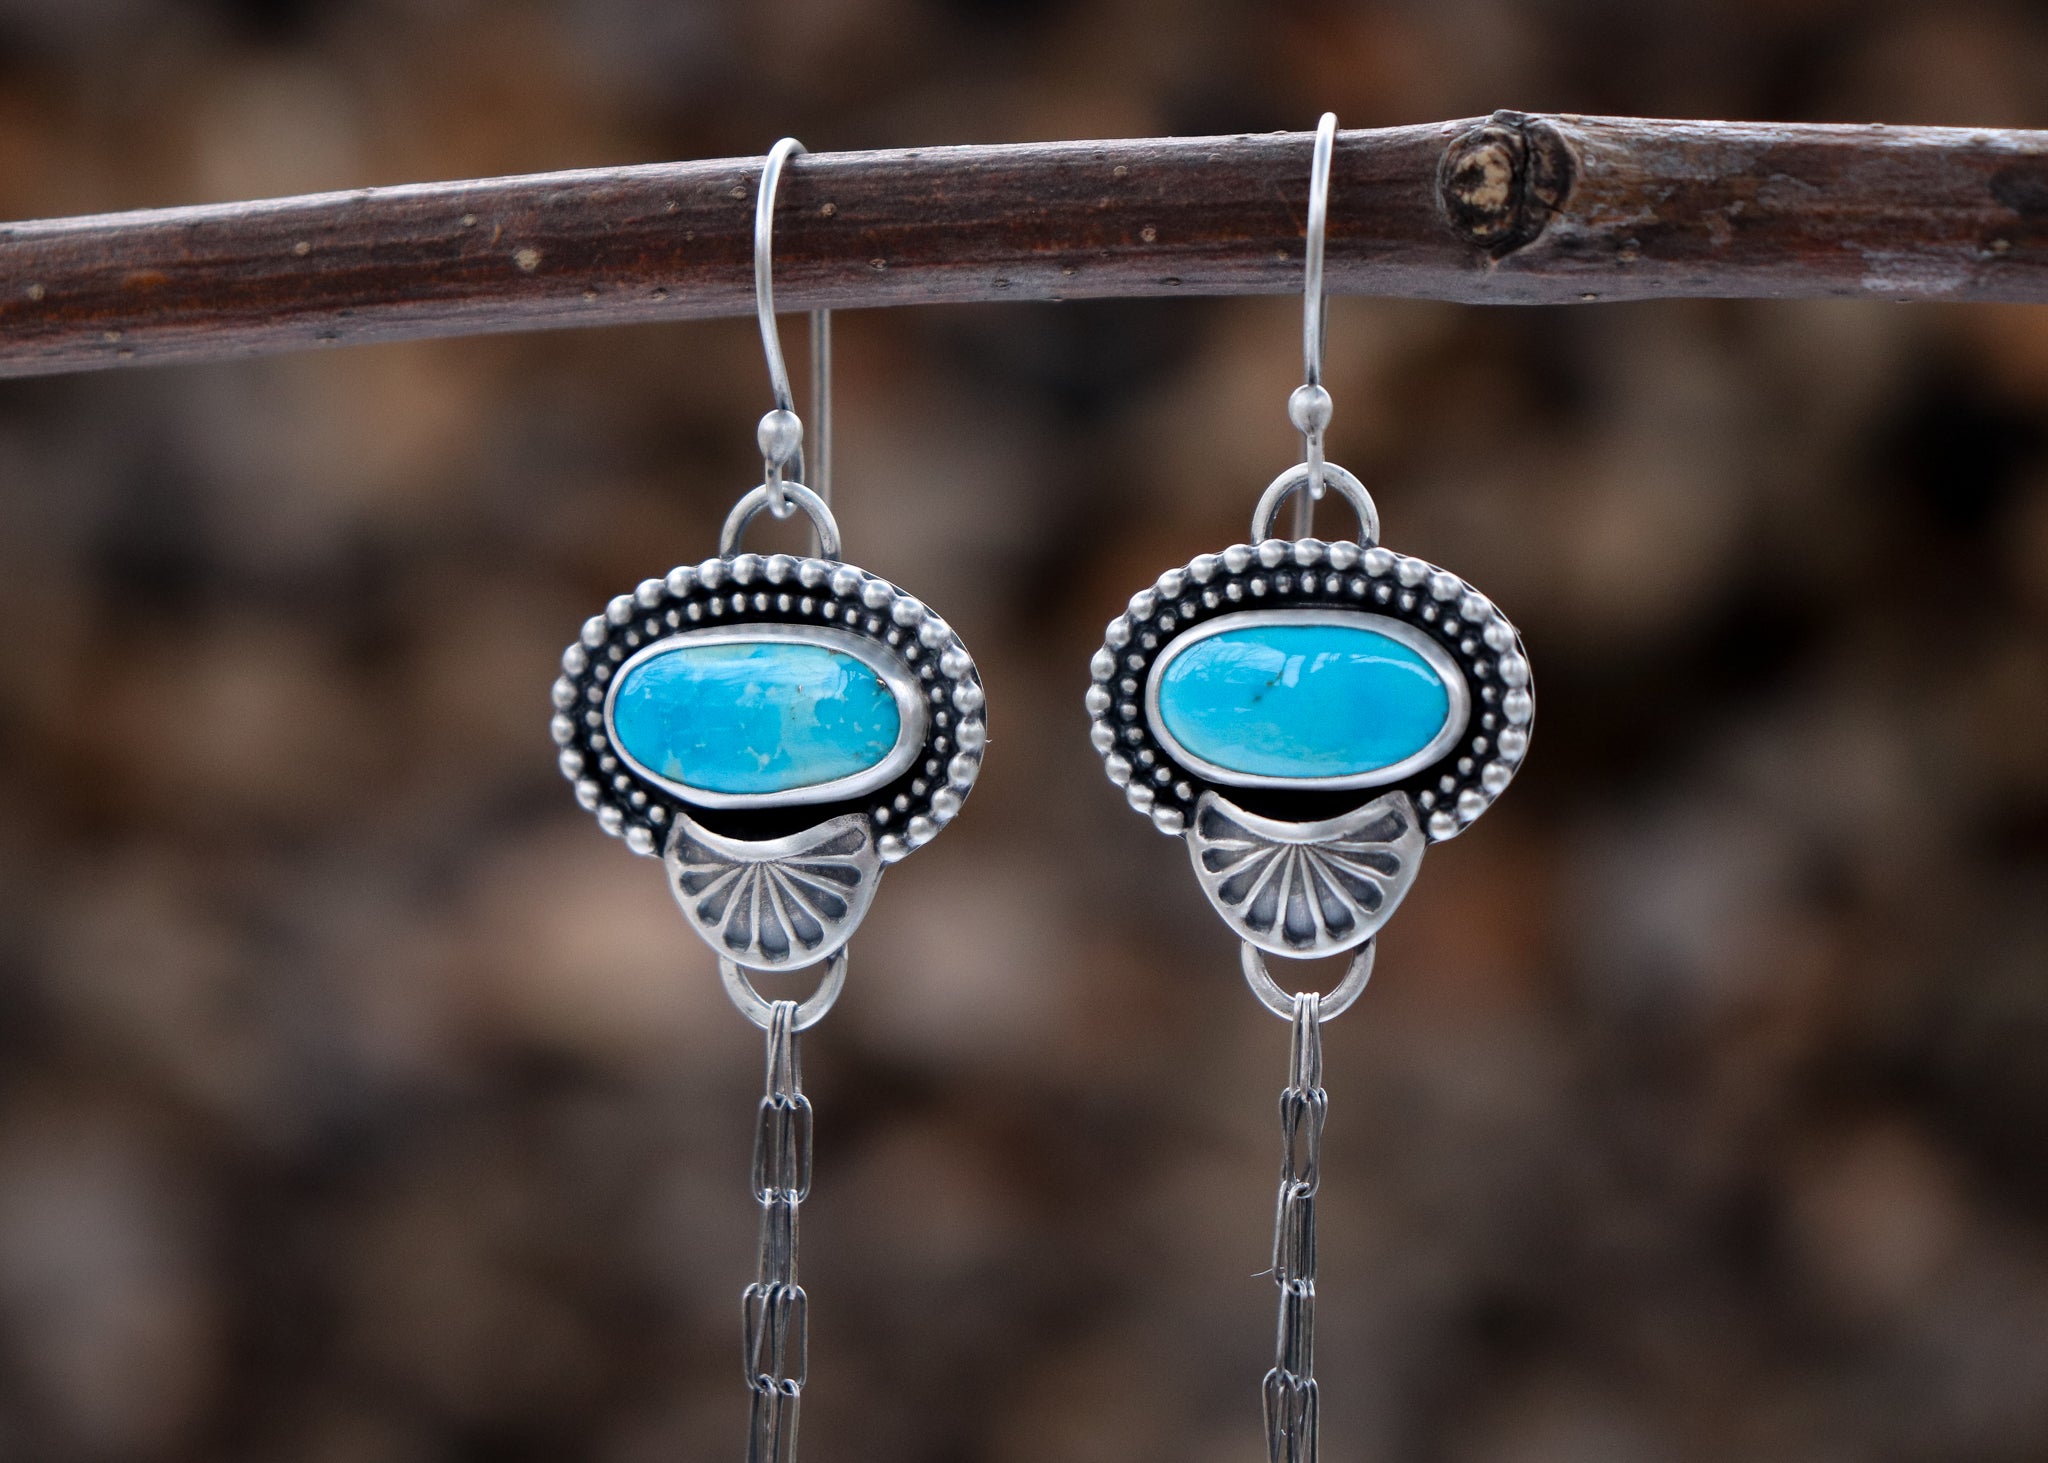 Daisy Chain Earrings - Sonoran Rose Turquoise